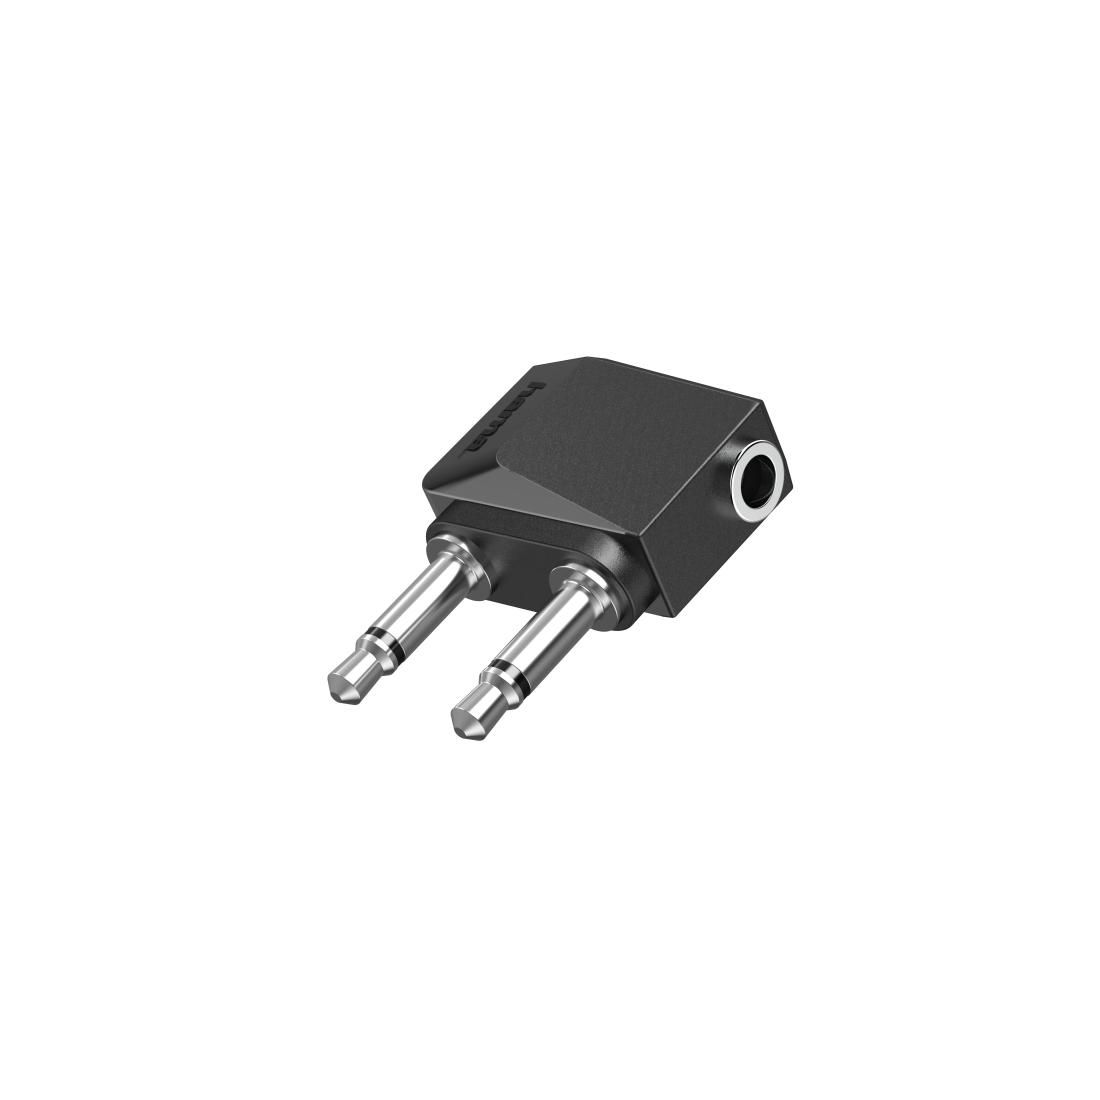 Hama 205192 W128824615 2 Cable Gender Changer 2 X 